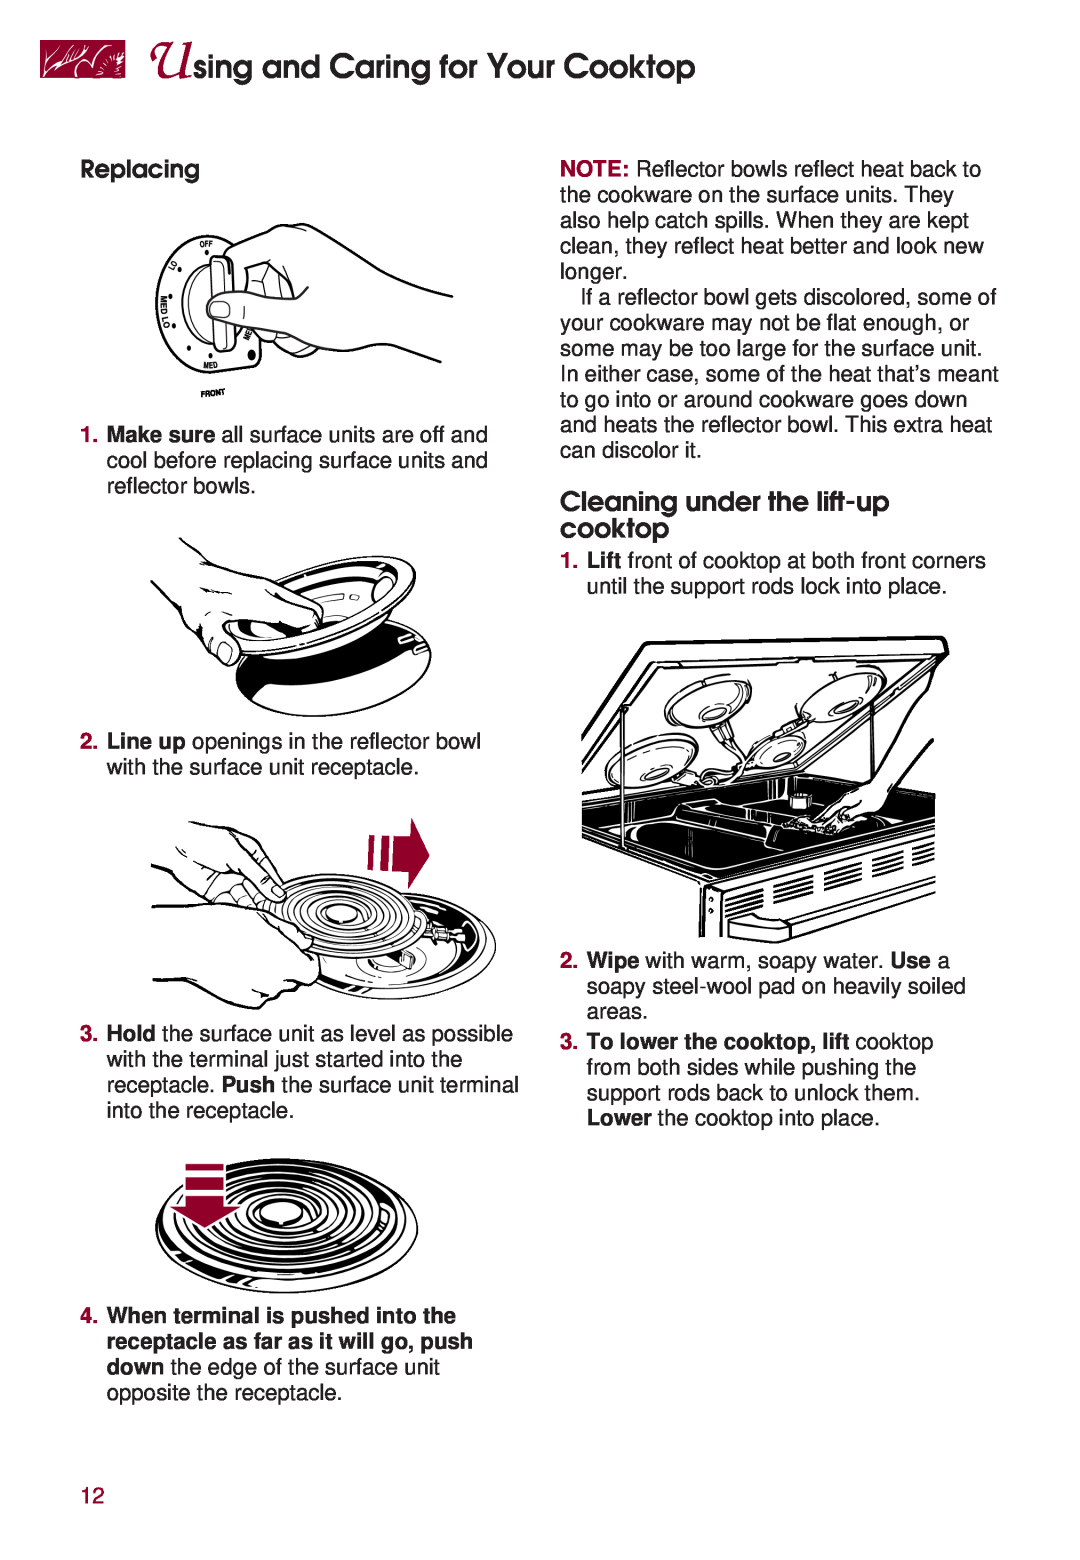 KitchenAid KERS507 warranty Cleaning under the lift-up cooktop, Using and Caring for Your Cooktop, Replacing 